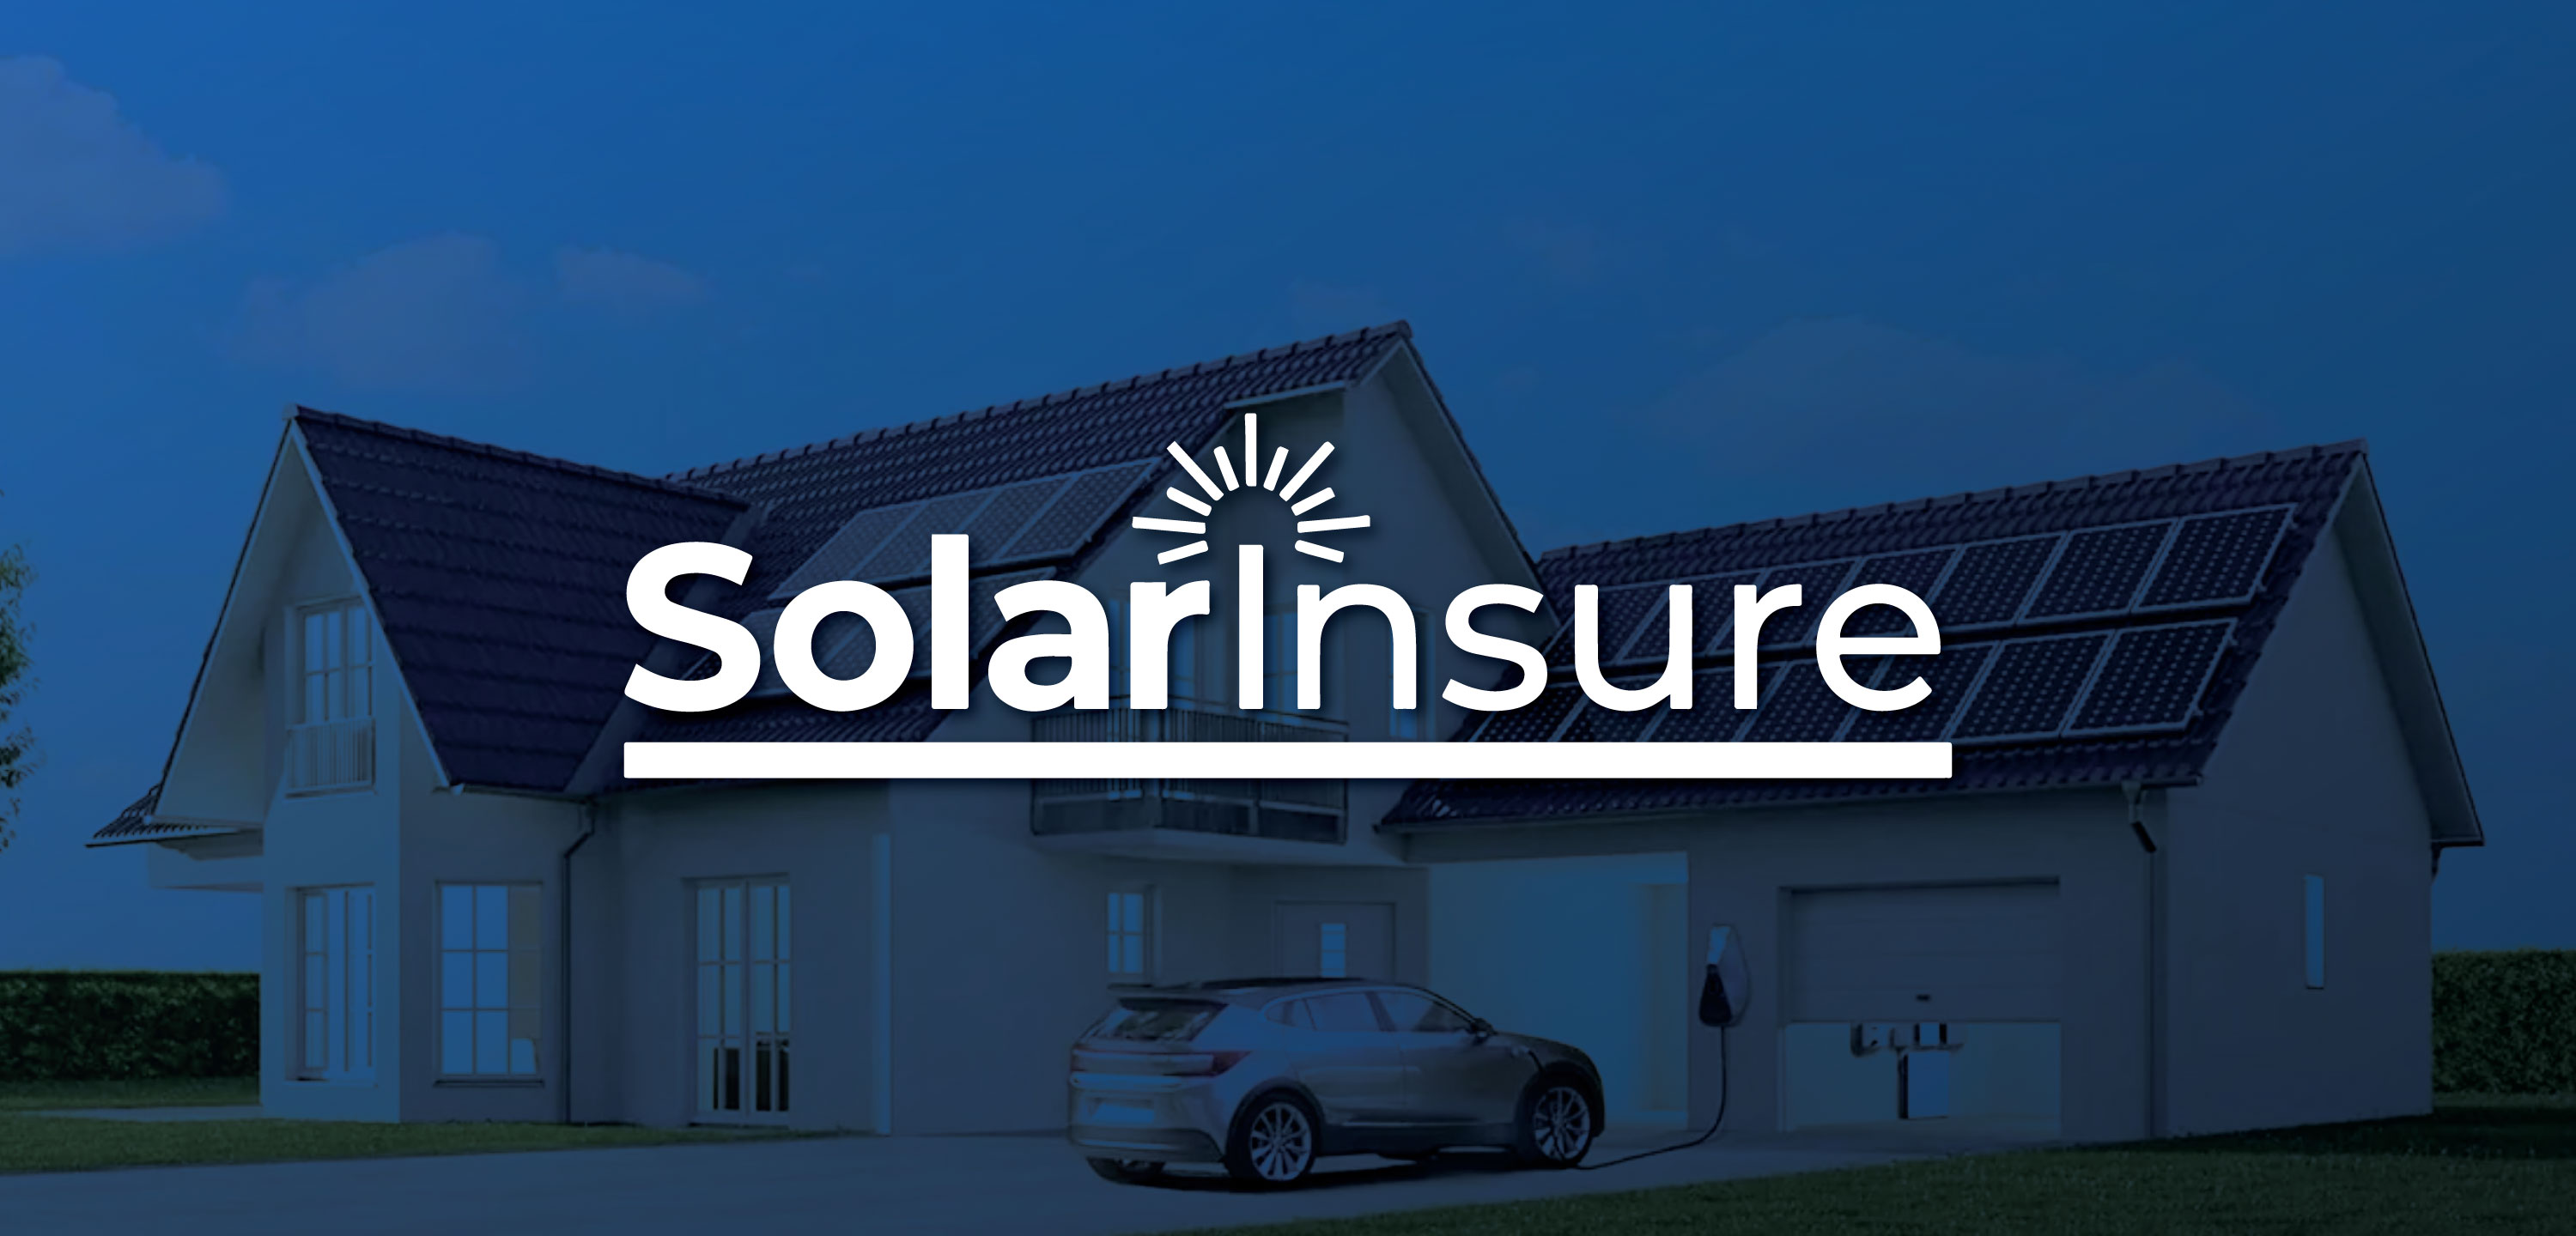 Solar Insure: Everything you need to know